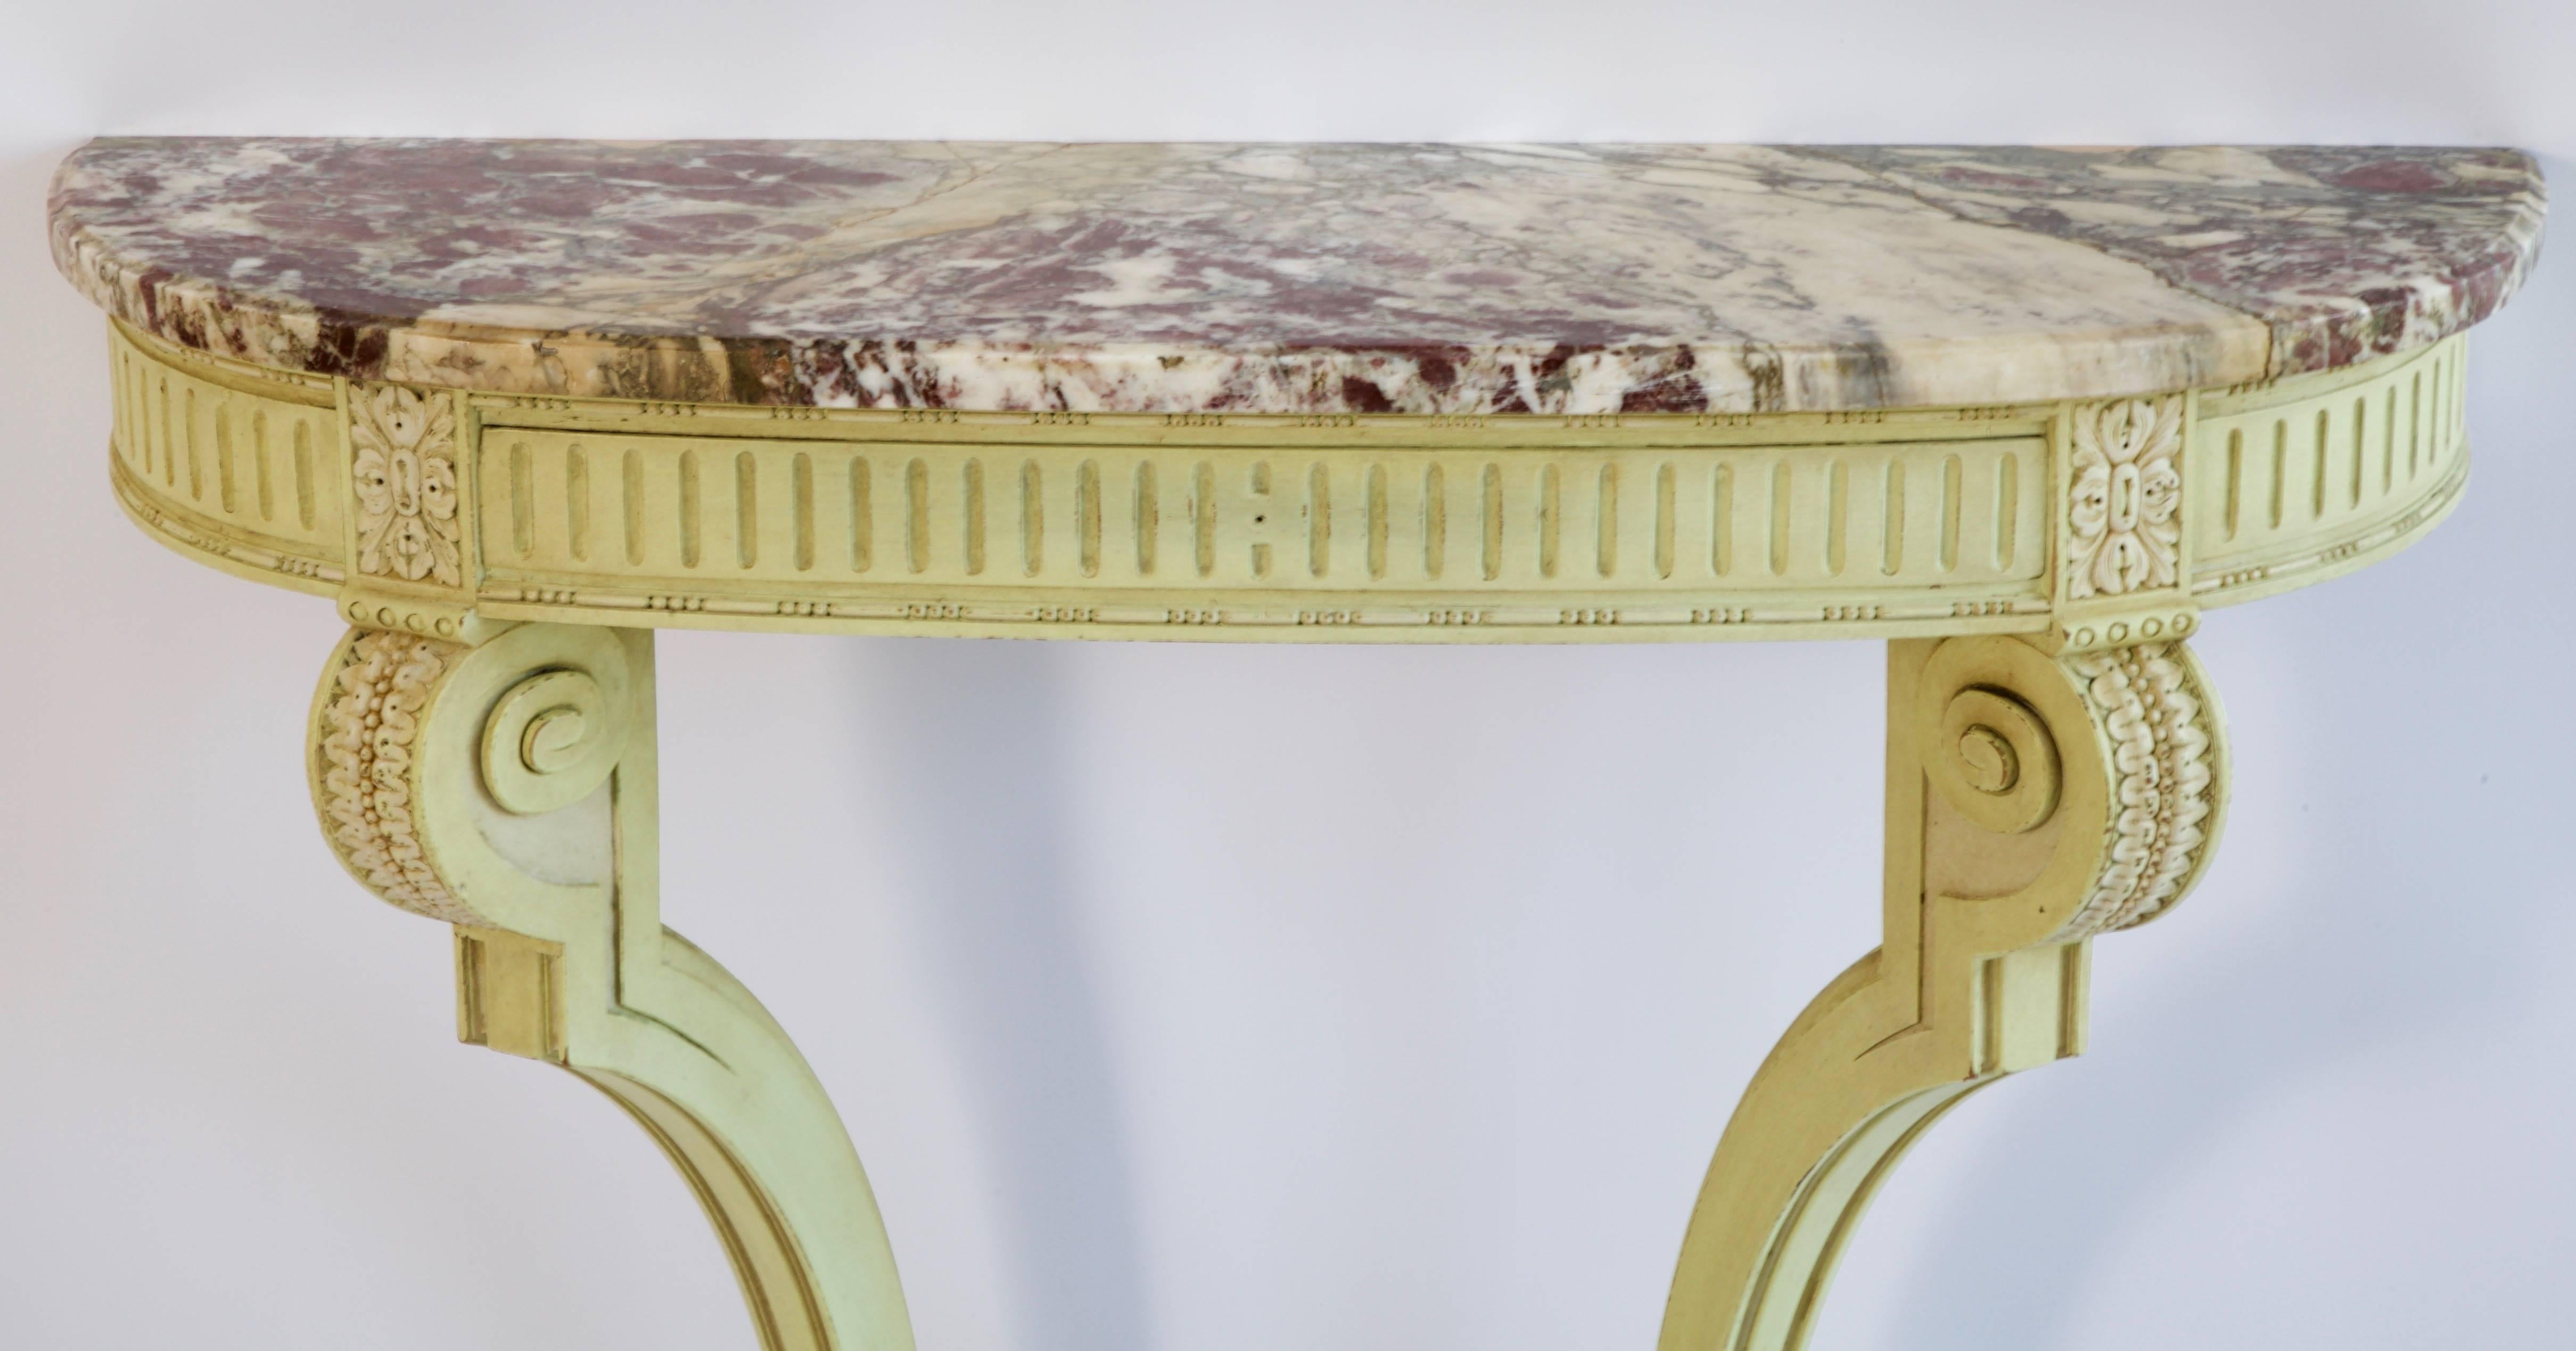 Louis XVI style demilune console, painted in a Georgian green with white highlights.
Fitted with one drawer and an elegant breche marble.
Originally in an entrance hall.